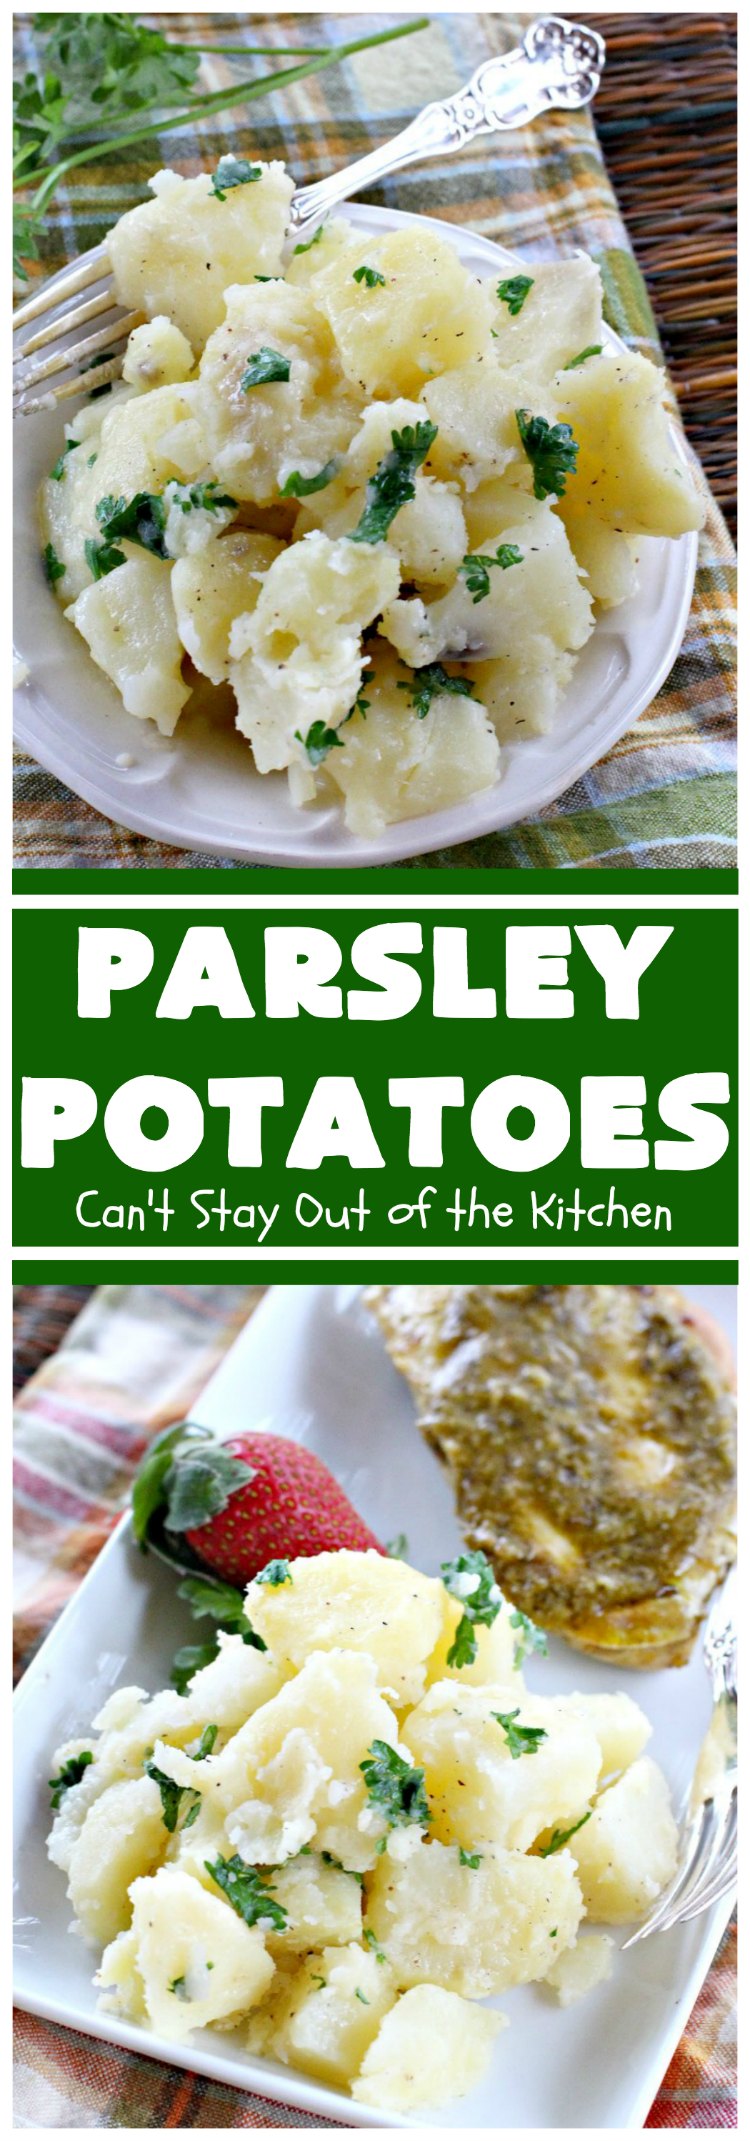 Parsley Potatoes | Can't Stay Out of the Kitchen